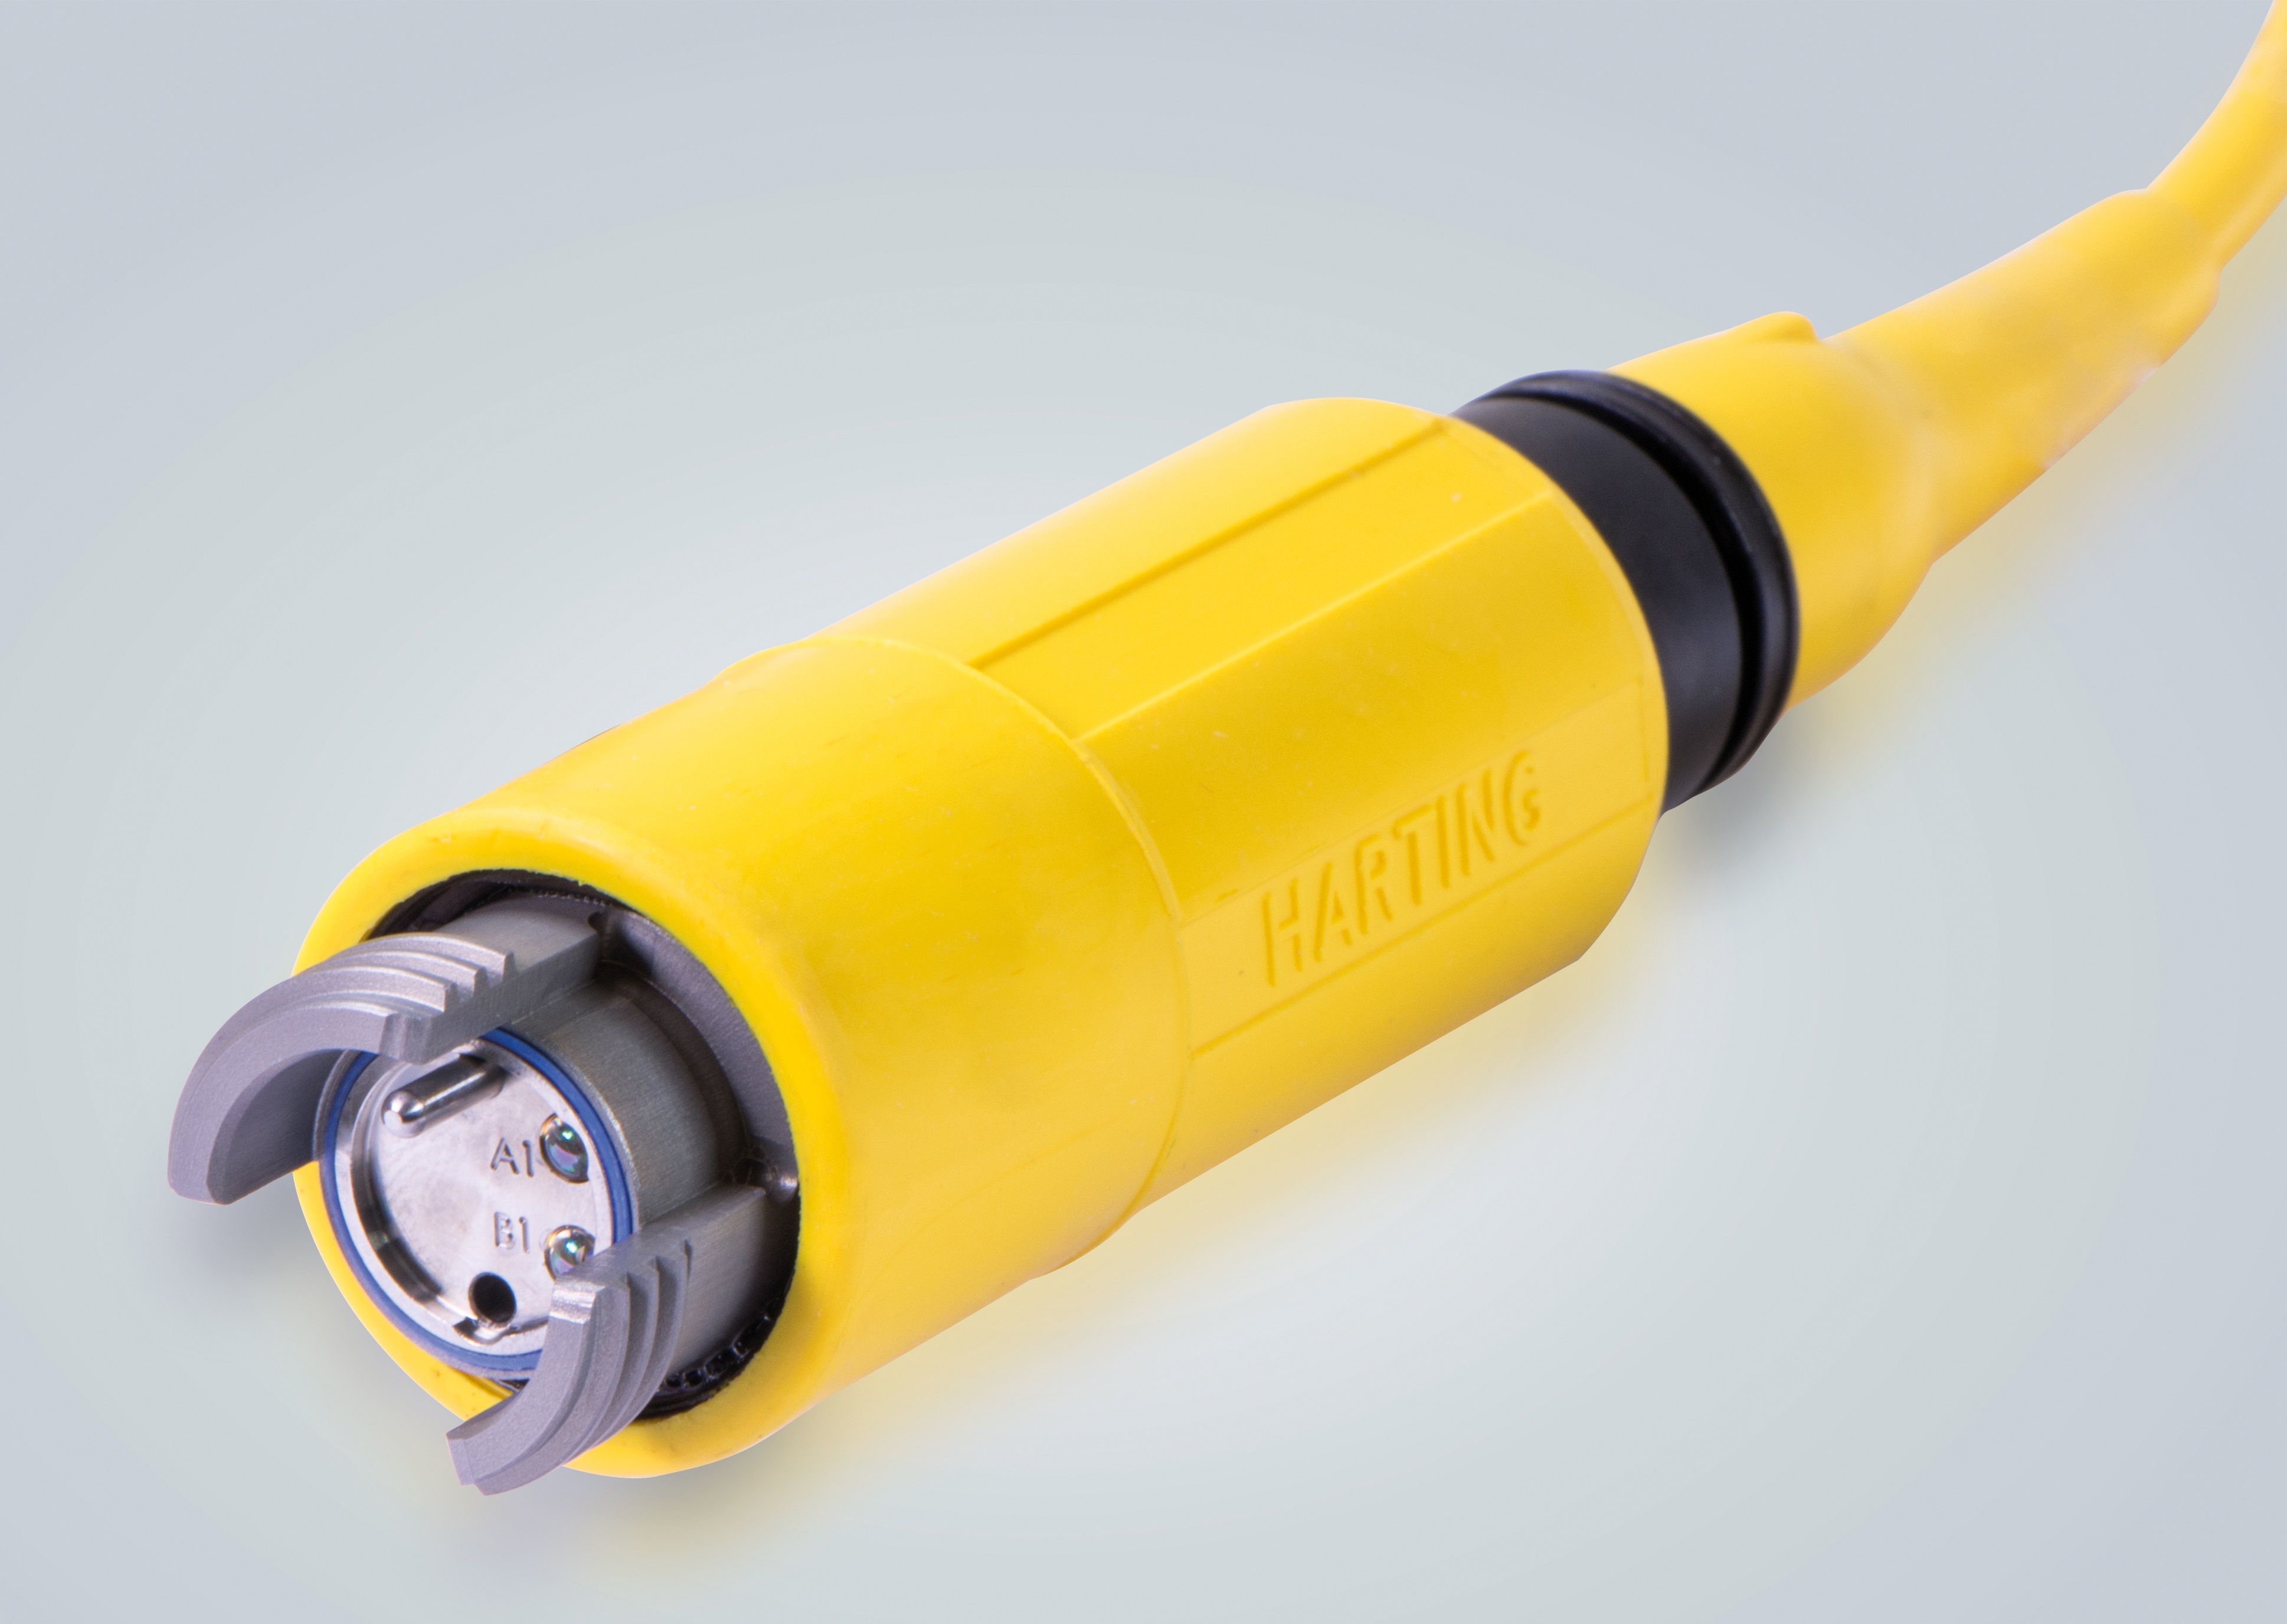 Fiber optic cable: Expanded beam connectors from HARTING